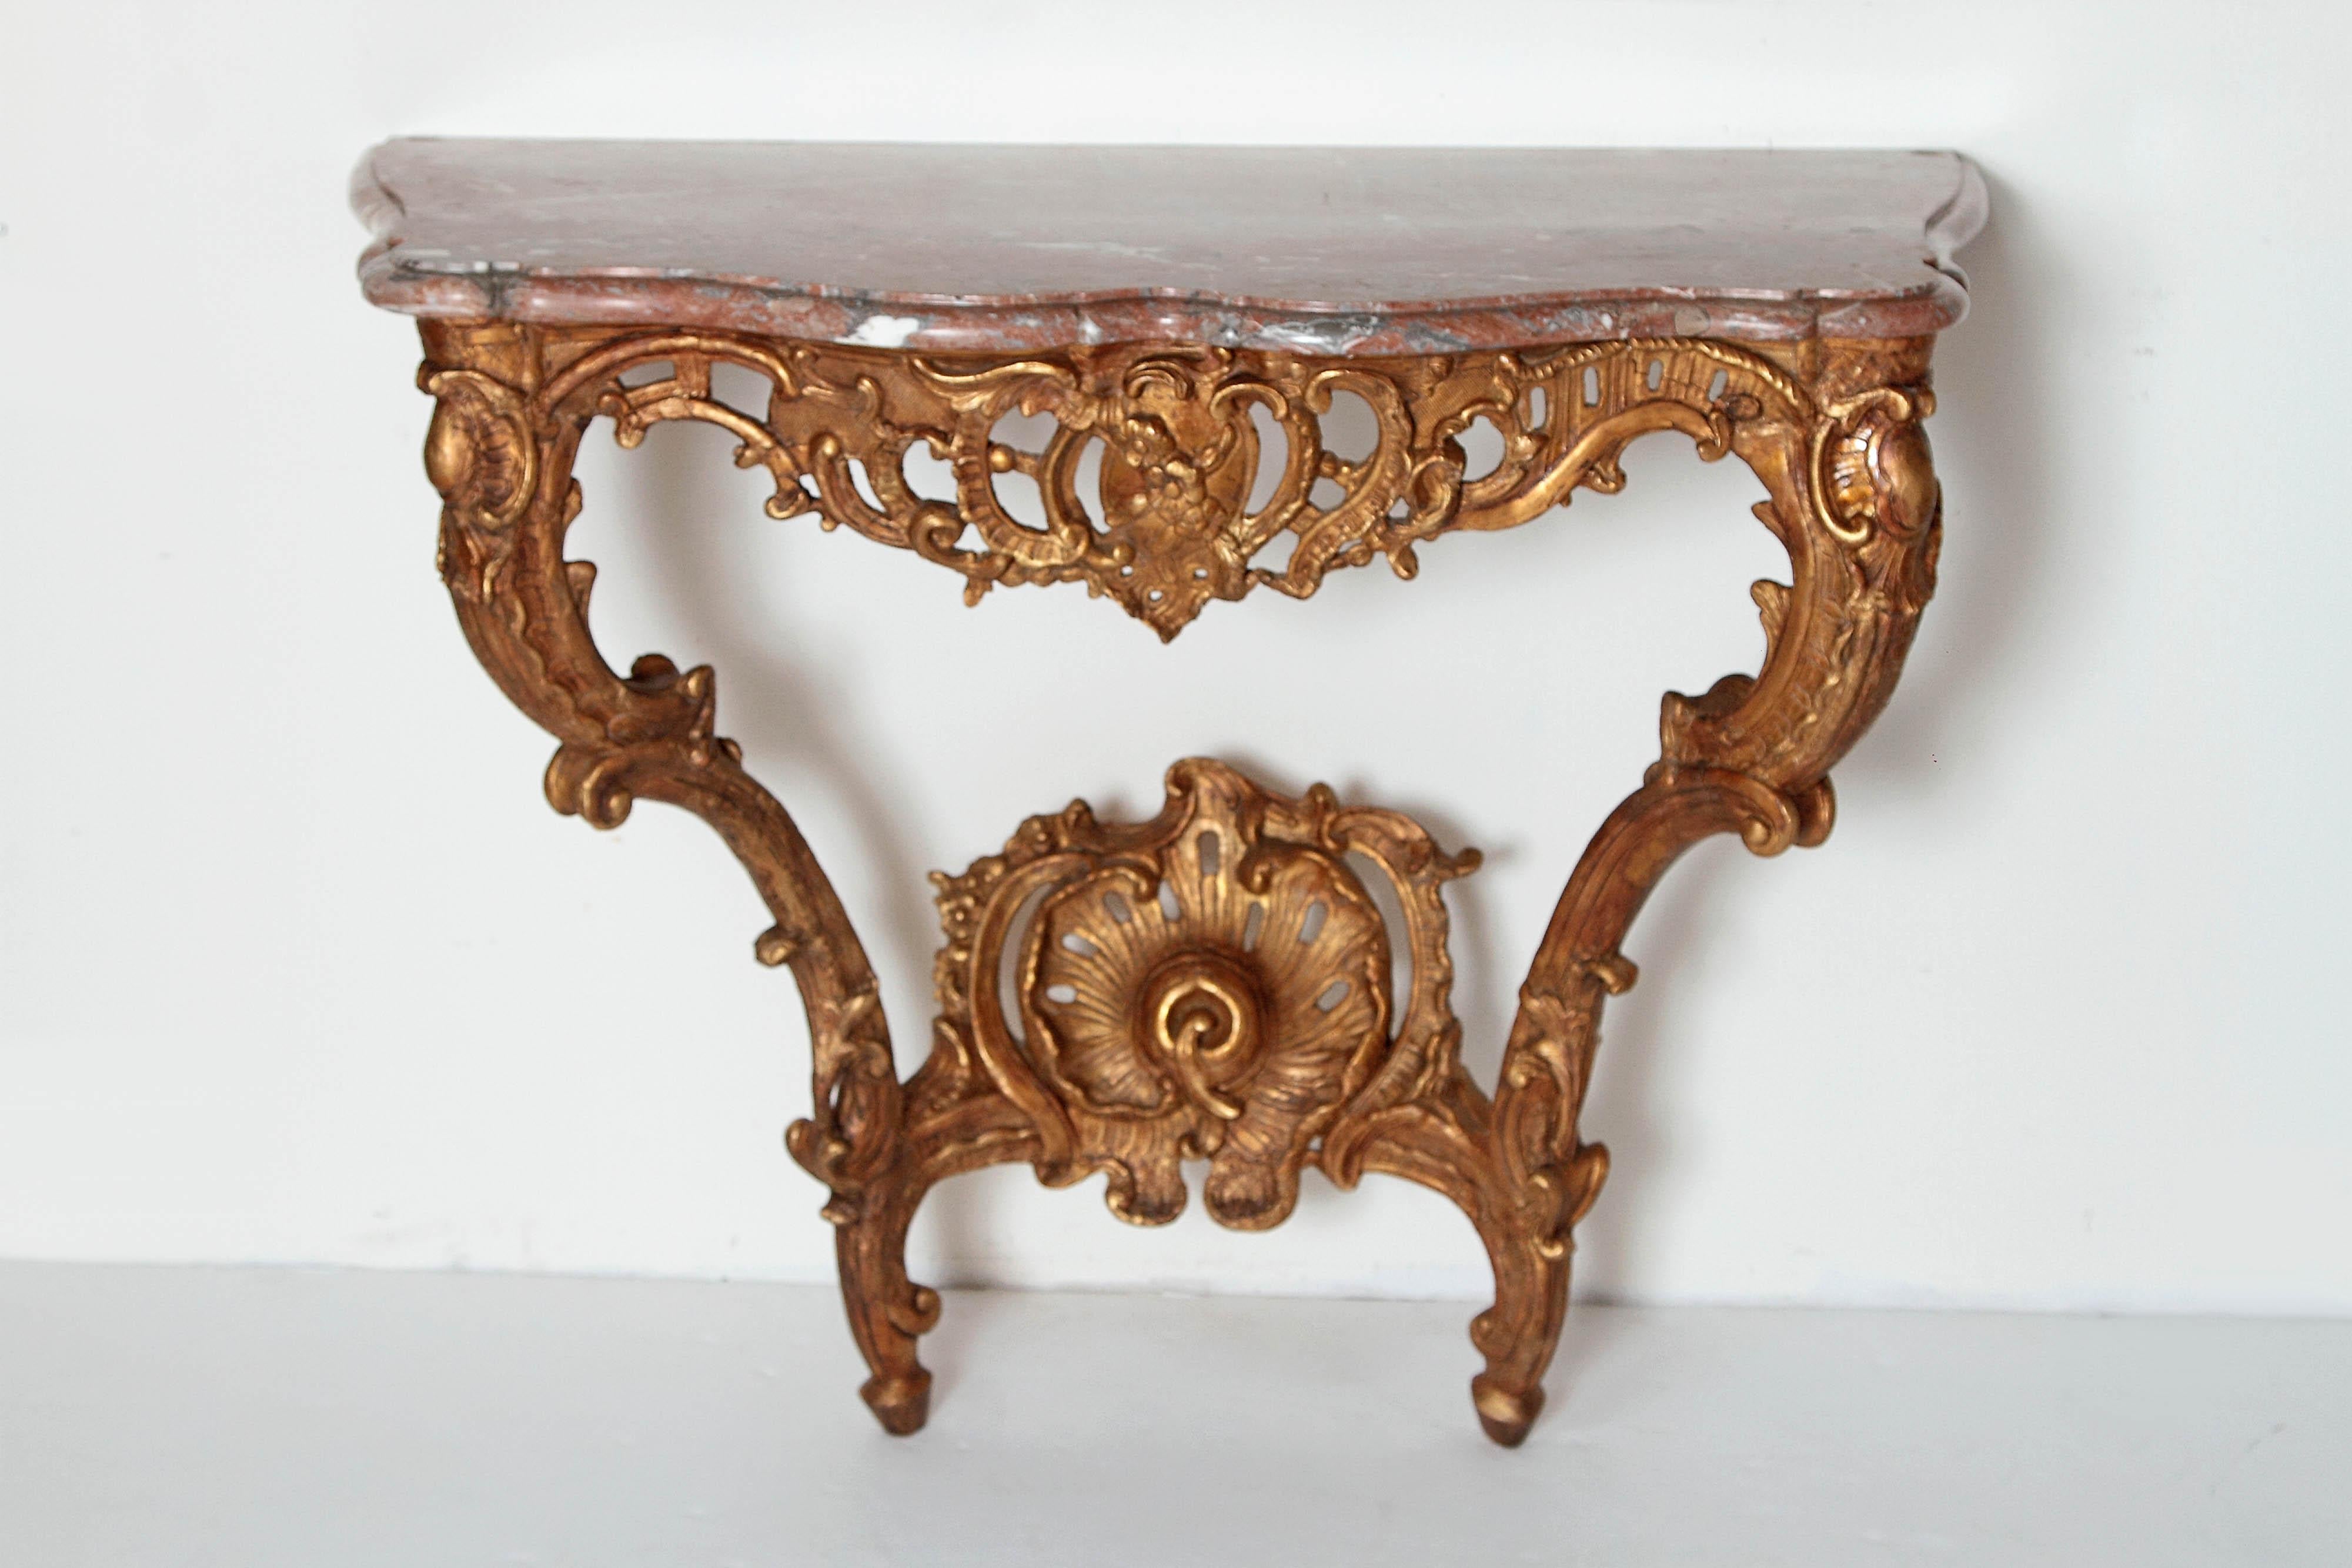 A beautiful Louis XV French 18th century giltwood console table with marble top. Heavily carved and pierced front apron. Two carved front legs curving into a carved shell motif. The top is the original rose colored marble. 18th century France.